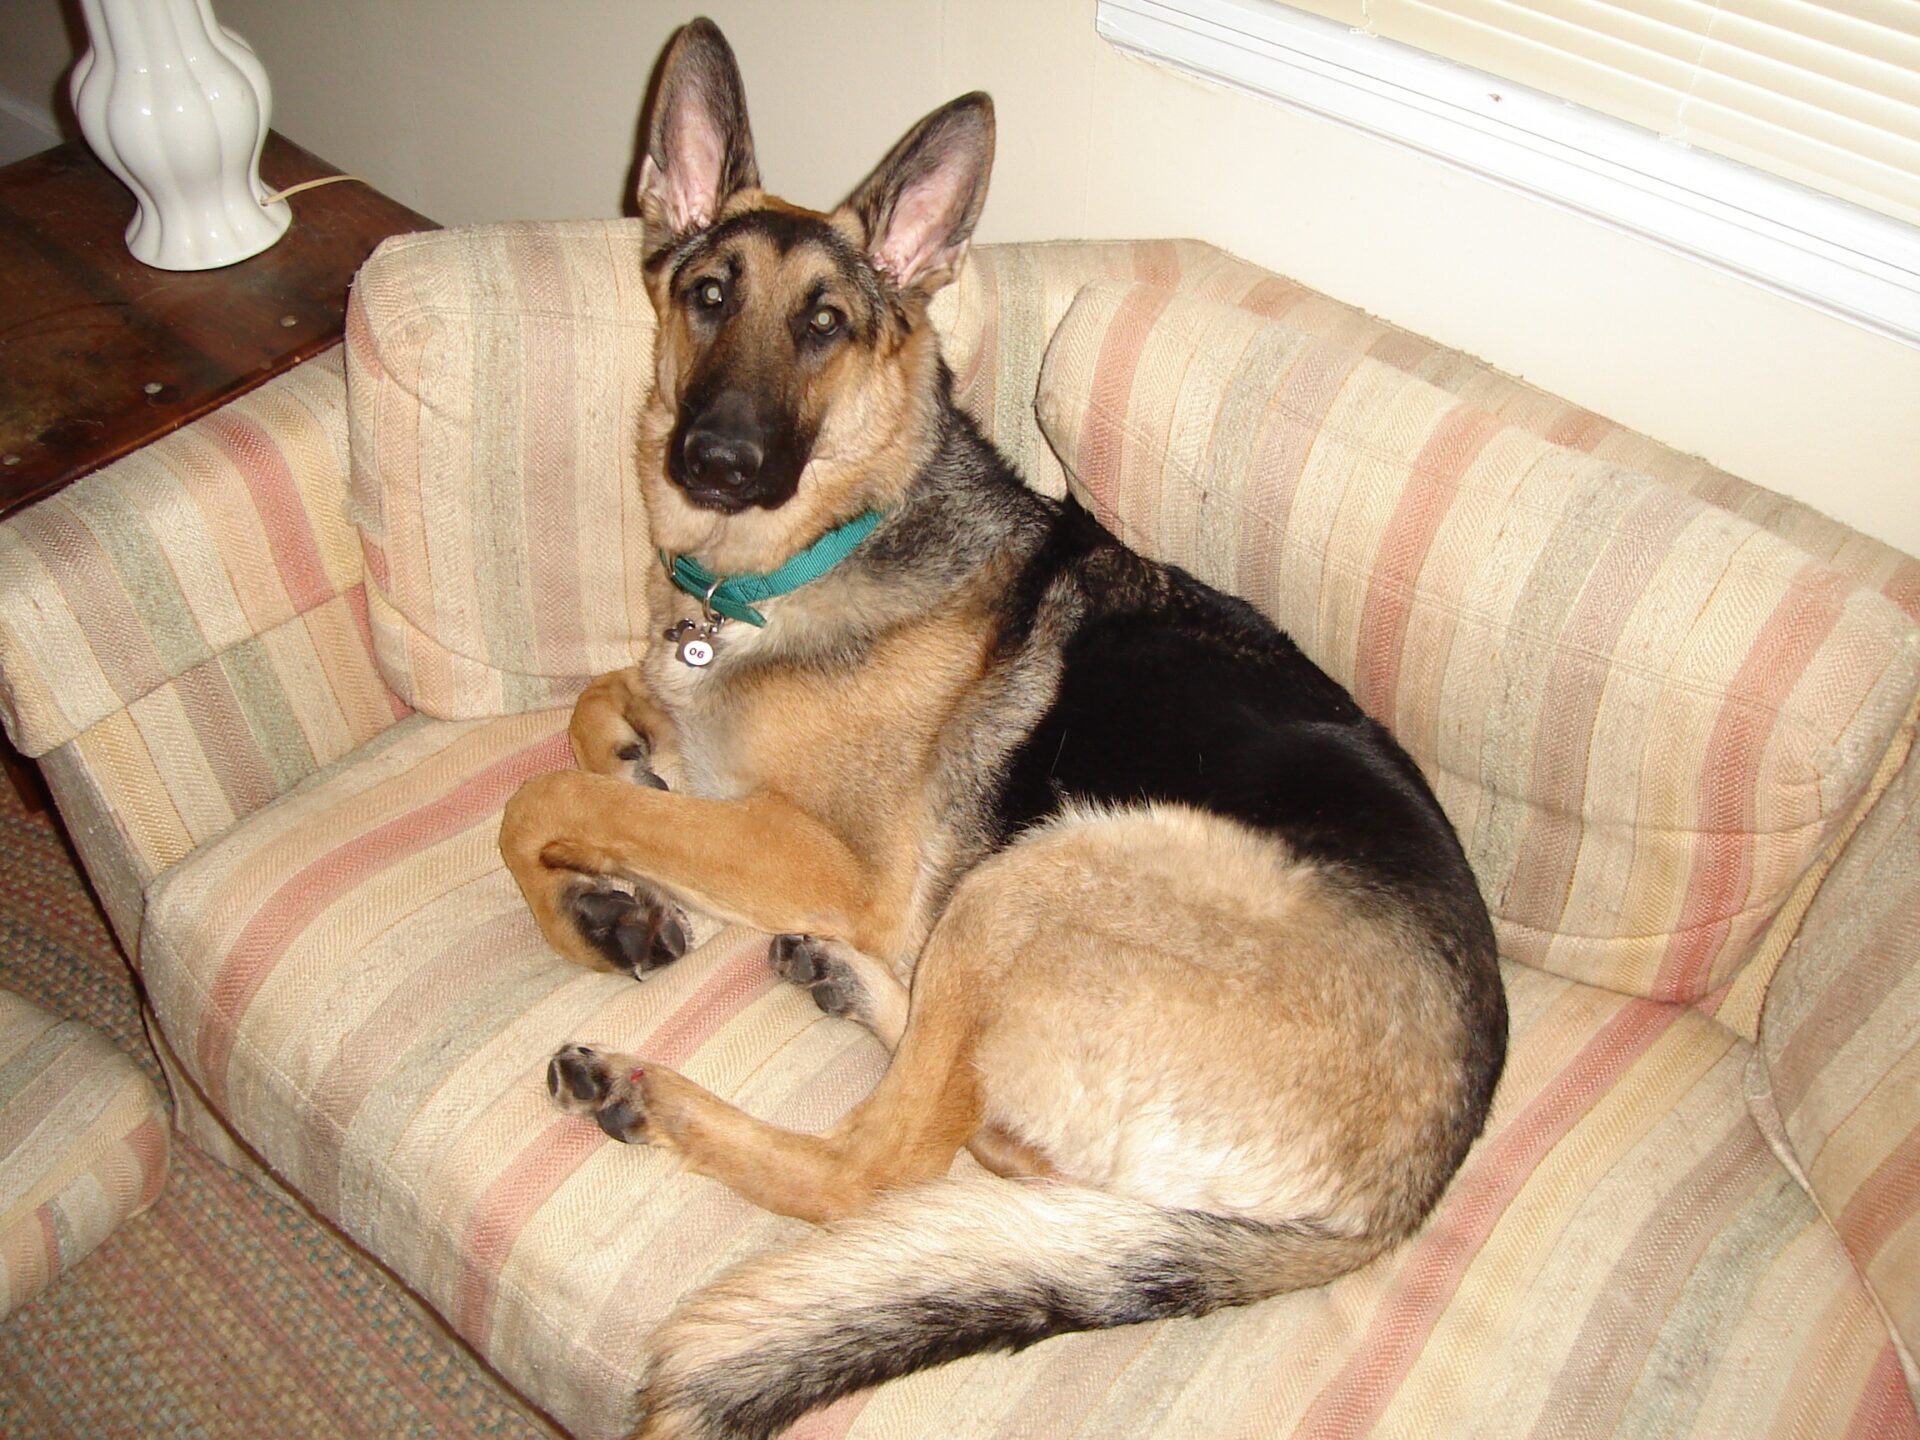 Trot German shepherd sitting on a pink striped couch